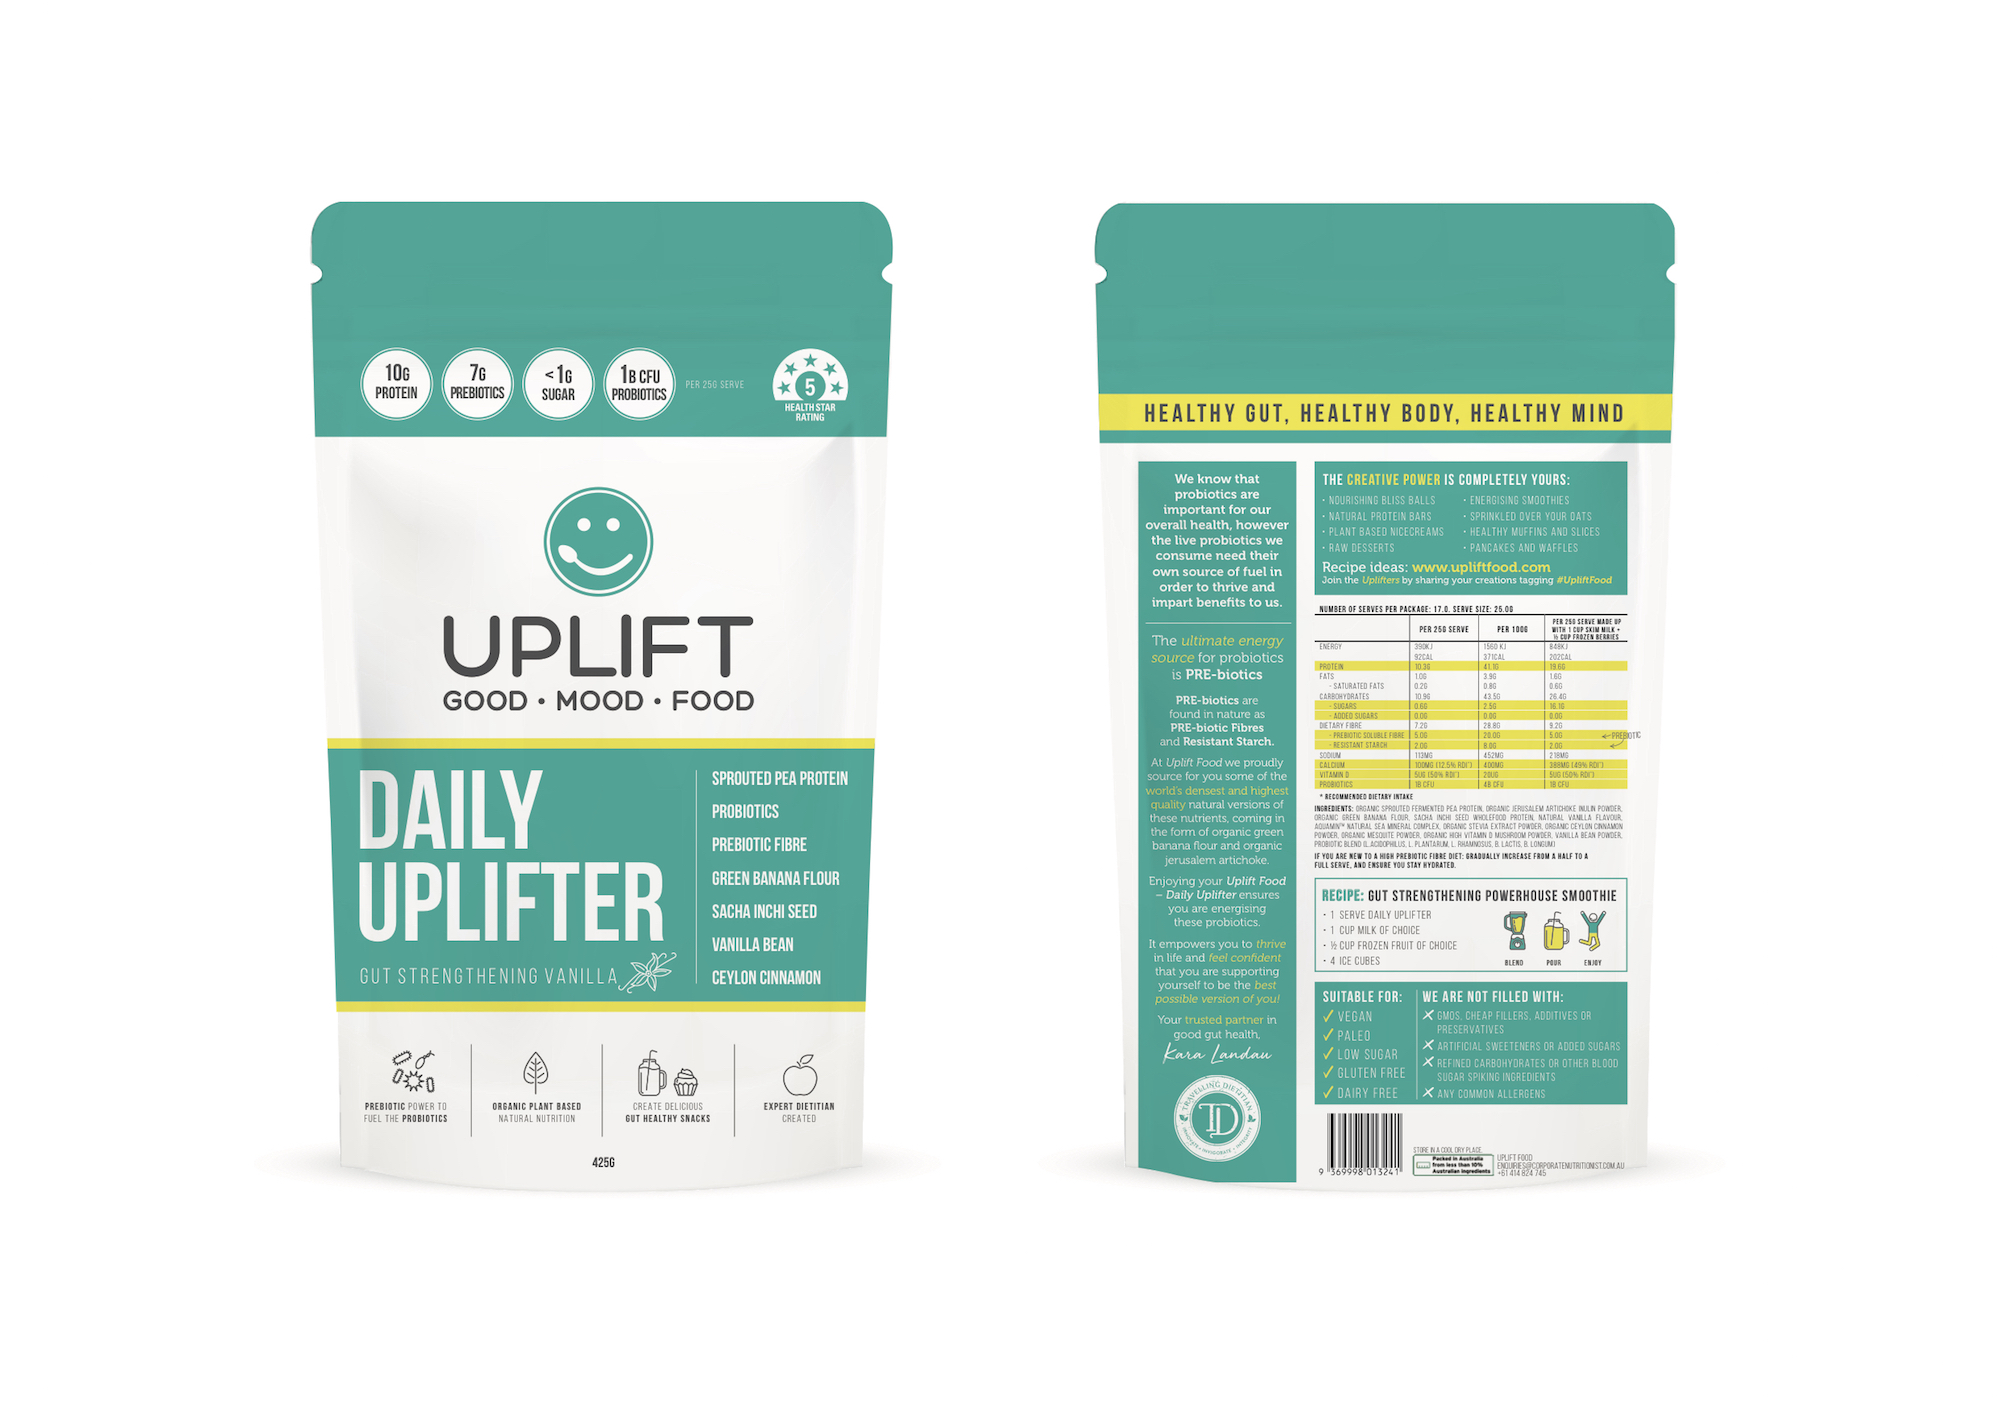 Uplift Food Daily Uplifter - The best prebiotic fibre supplement and resistant starch food product.